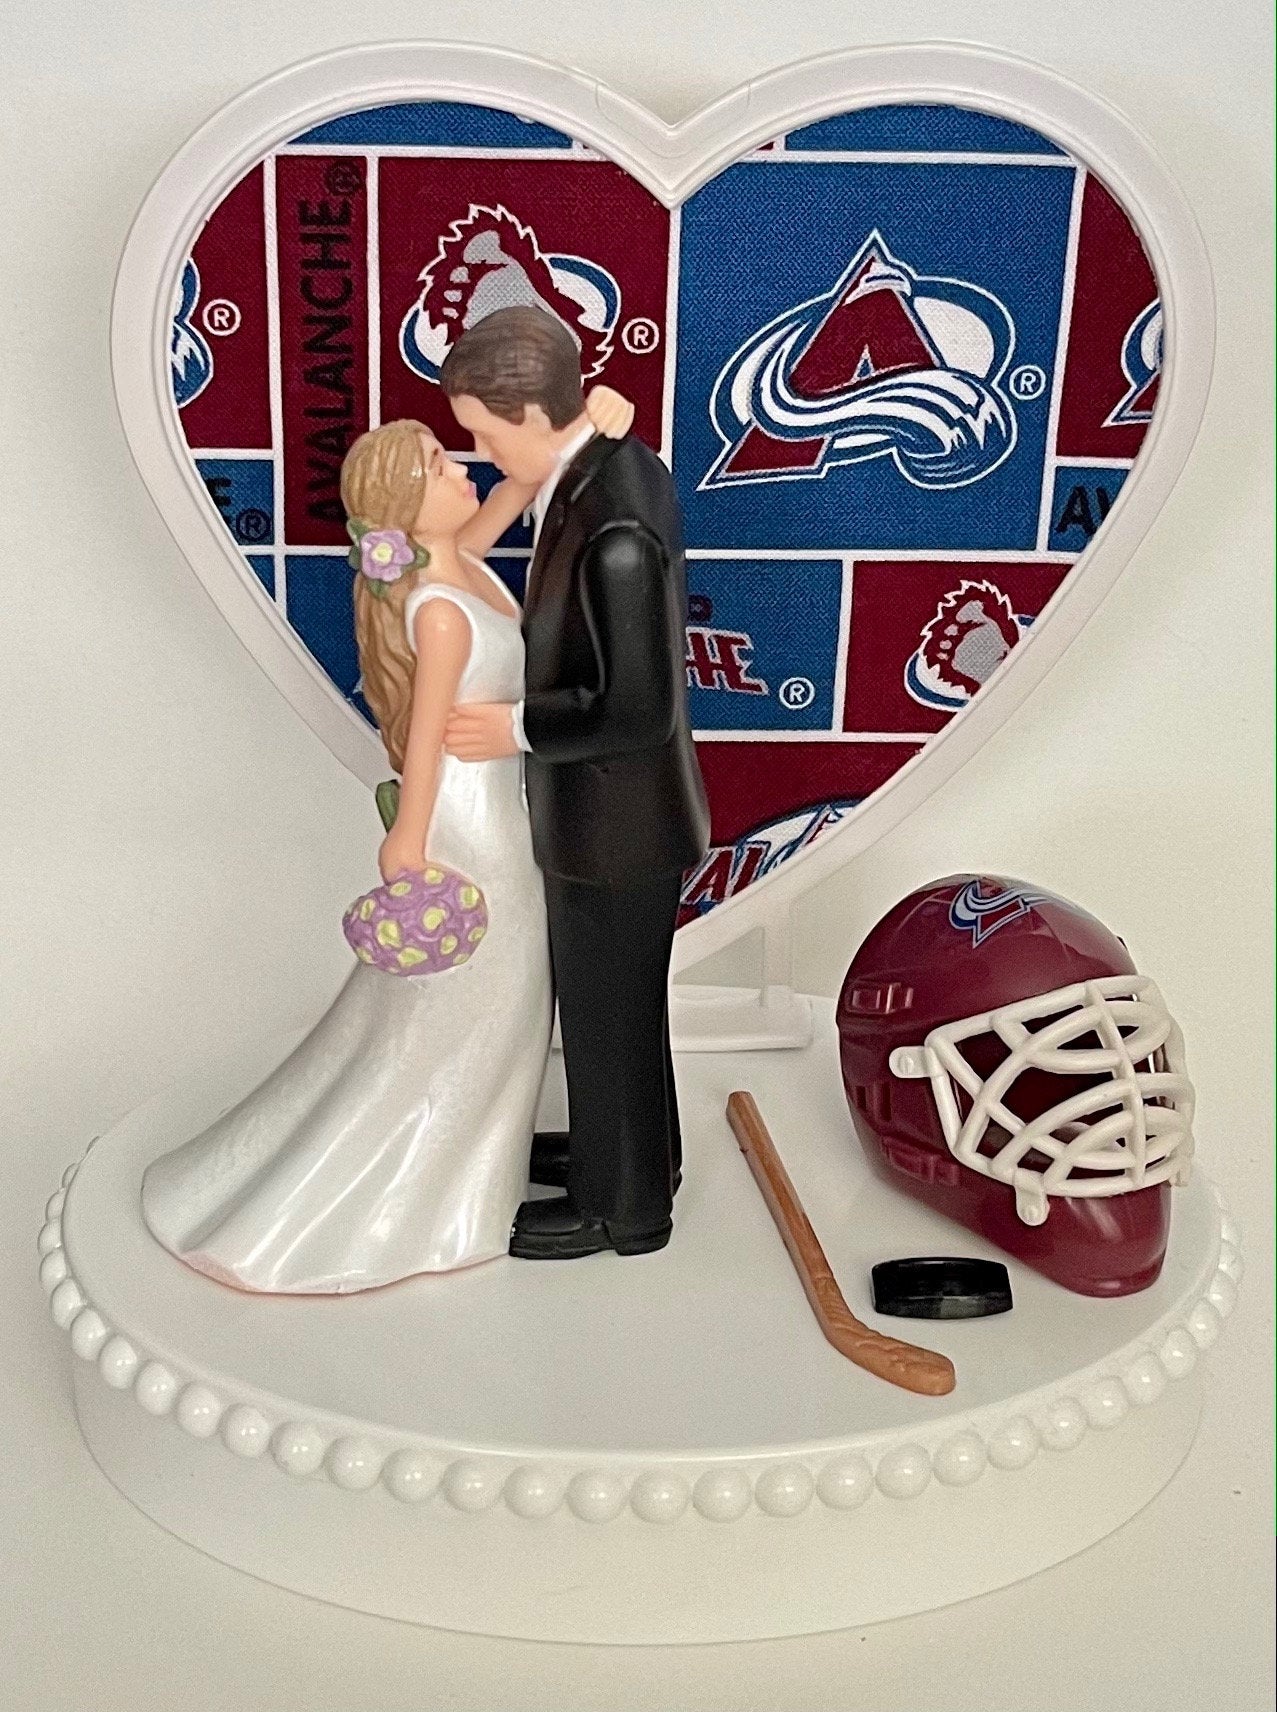 Wedding Cake Topper Colorado Avalanche Hockey Themed Gorgeous Long-Haired Bride and Groom Fun Groom's Cake Top Reception Shower Gift Idea